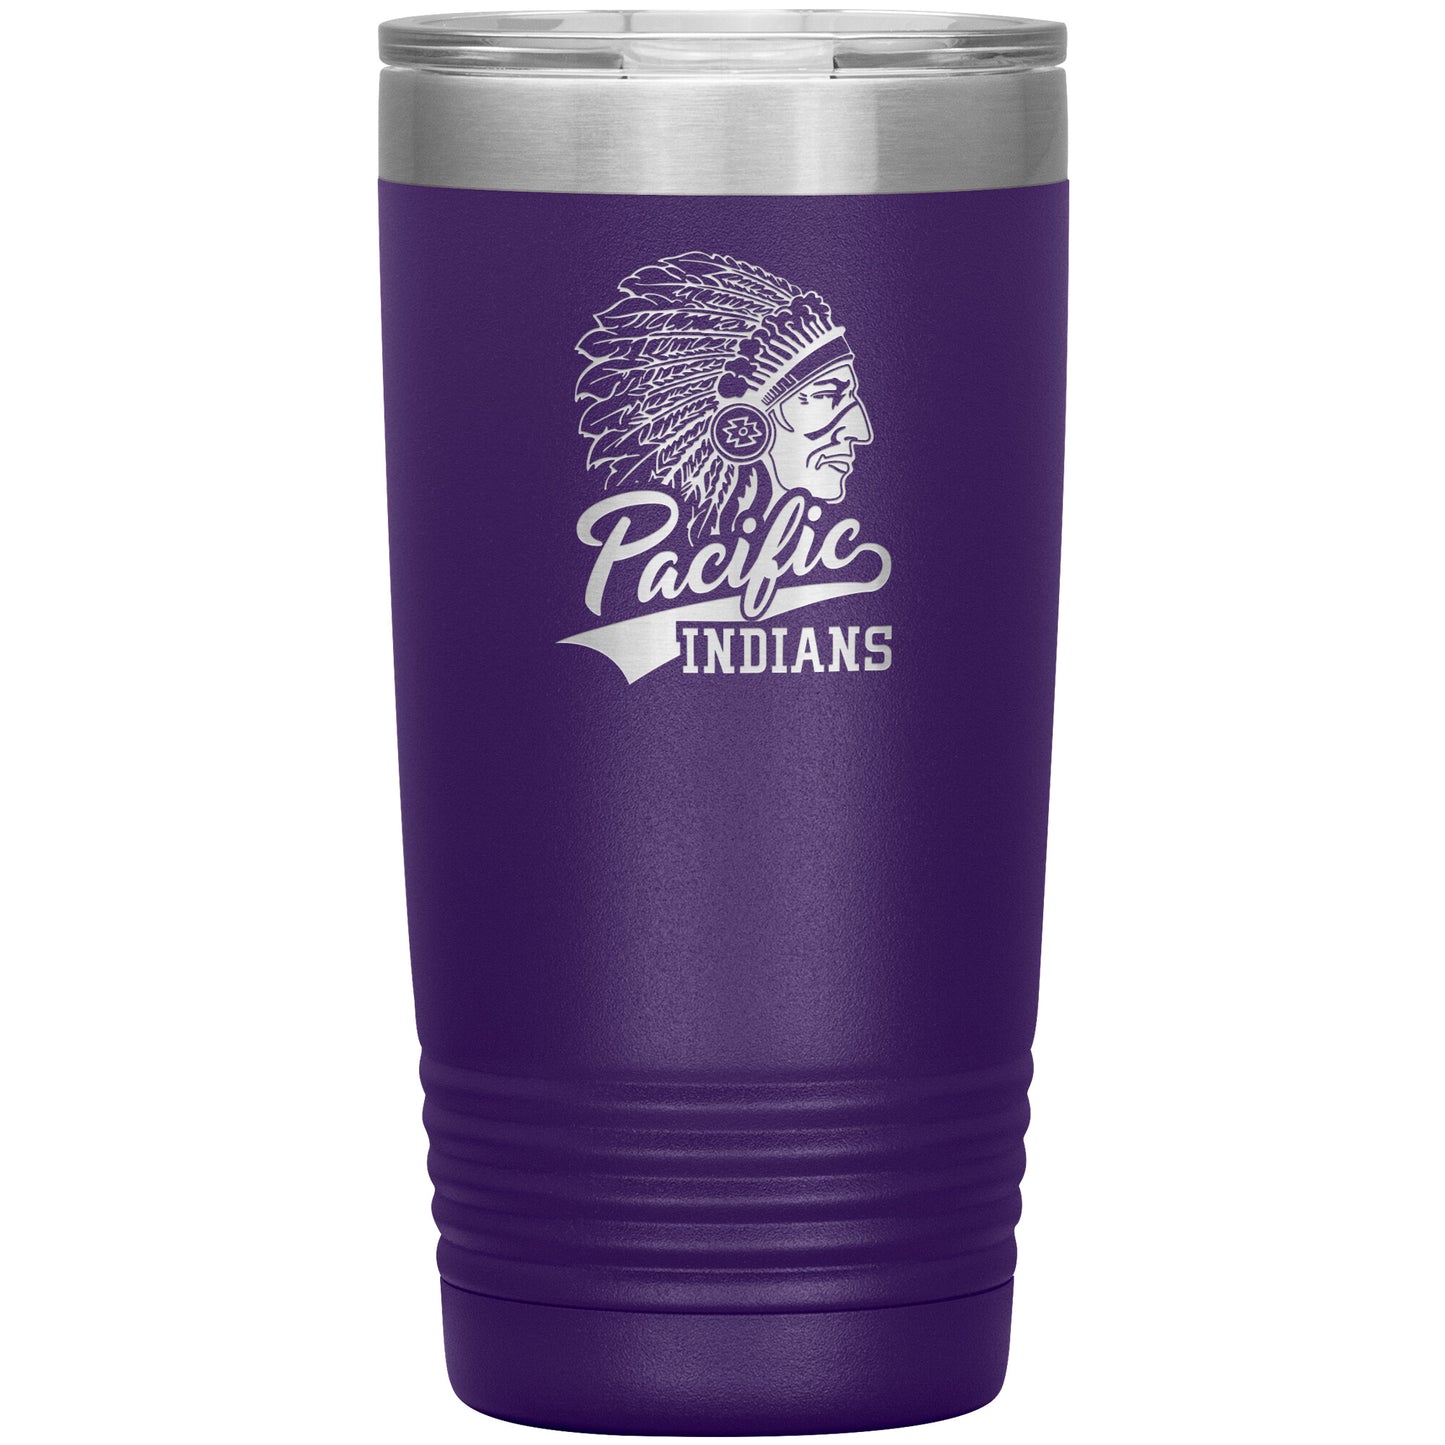 Pacific Indians Design 1 - Insulated Tumblers